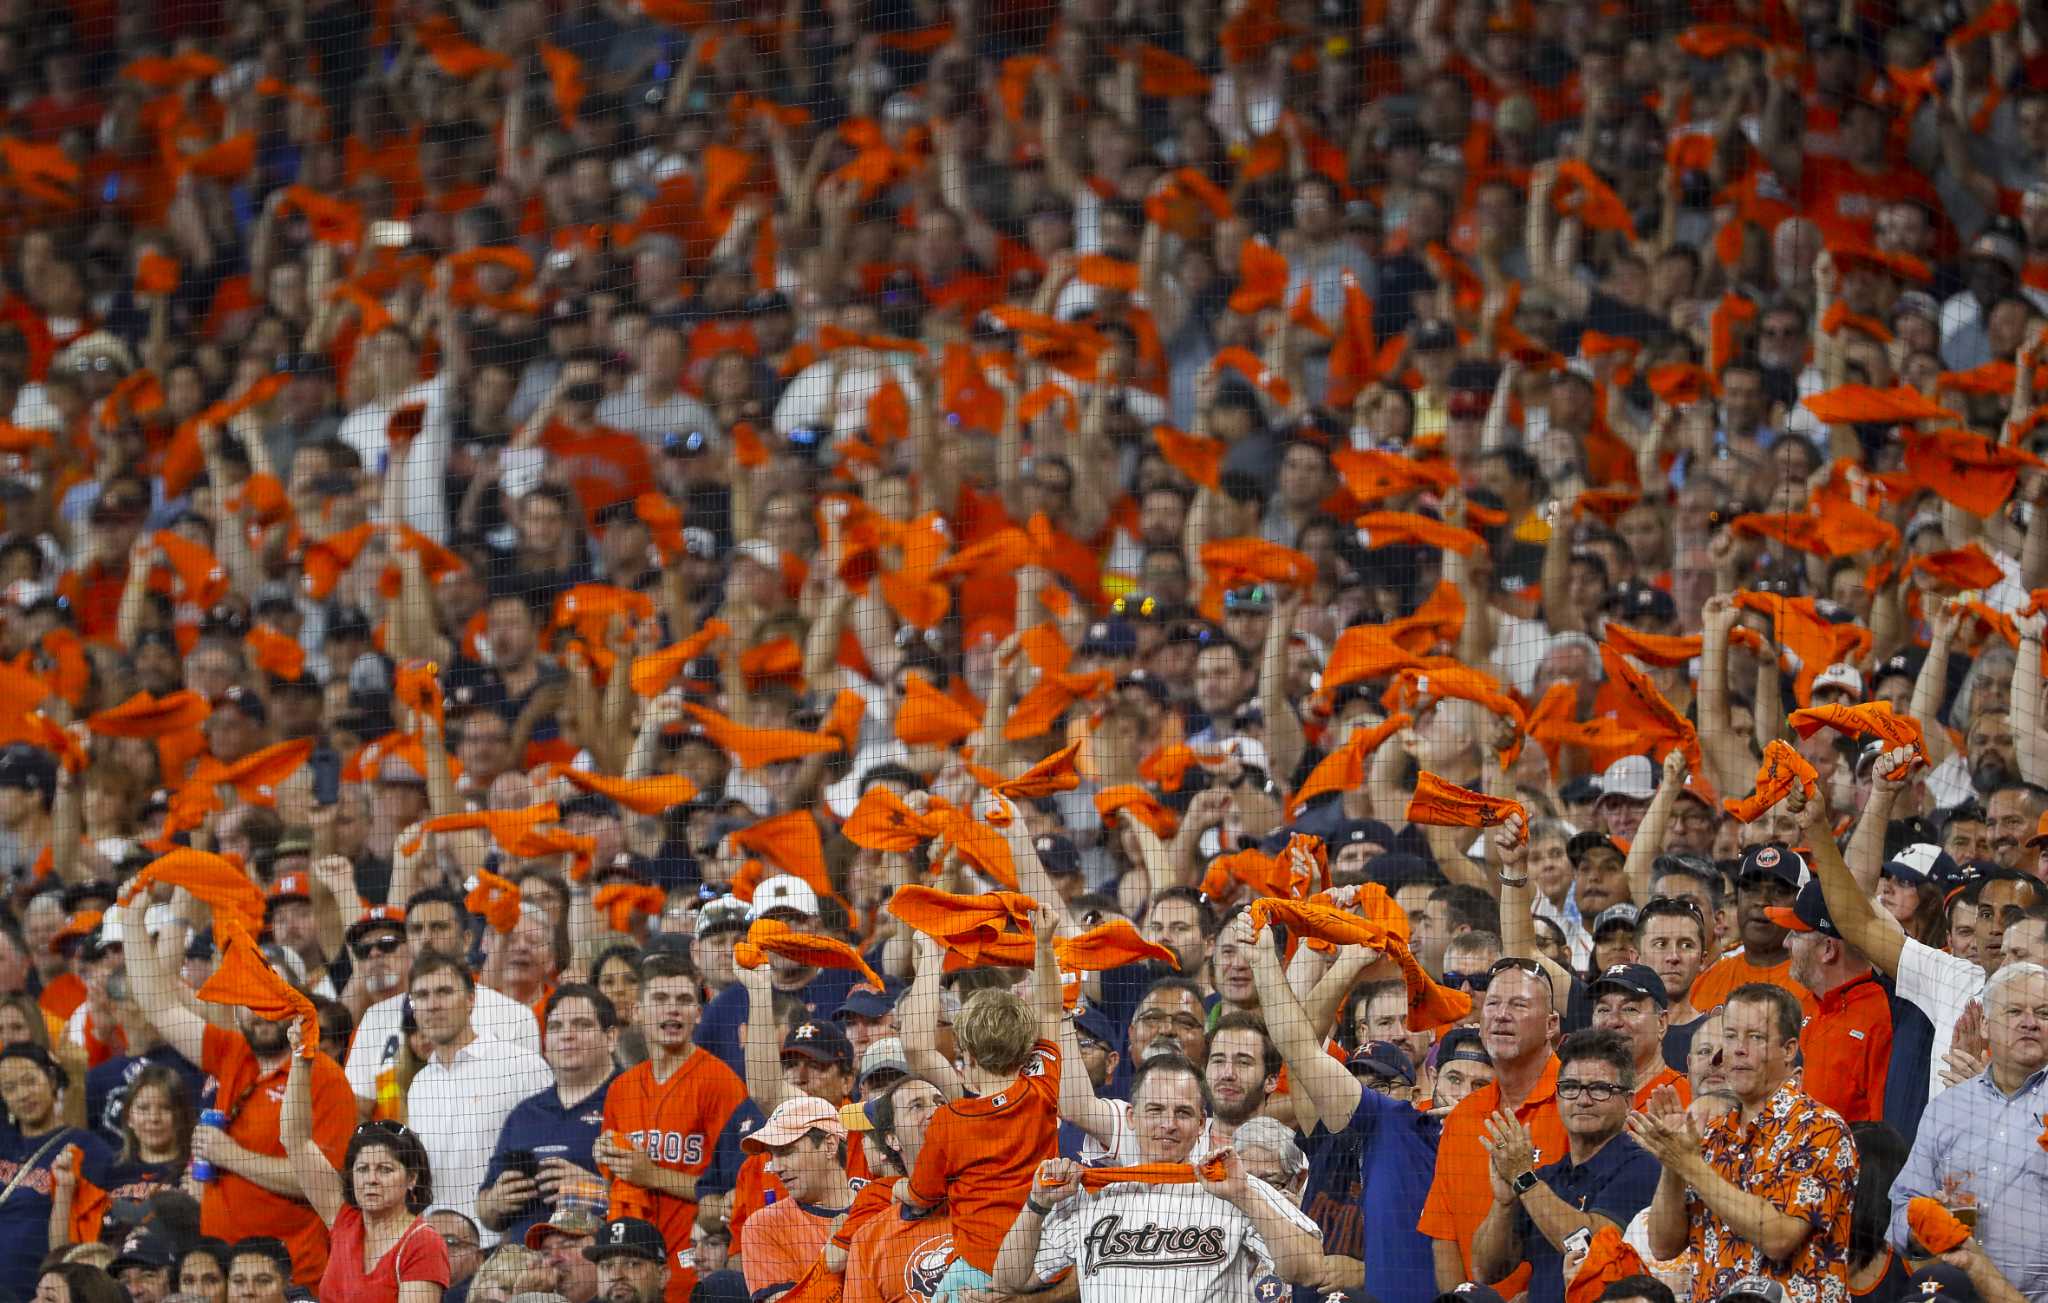 World Series or bust: Confident fans buckle in for Astros' playoff